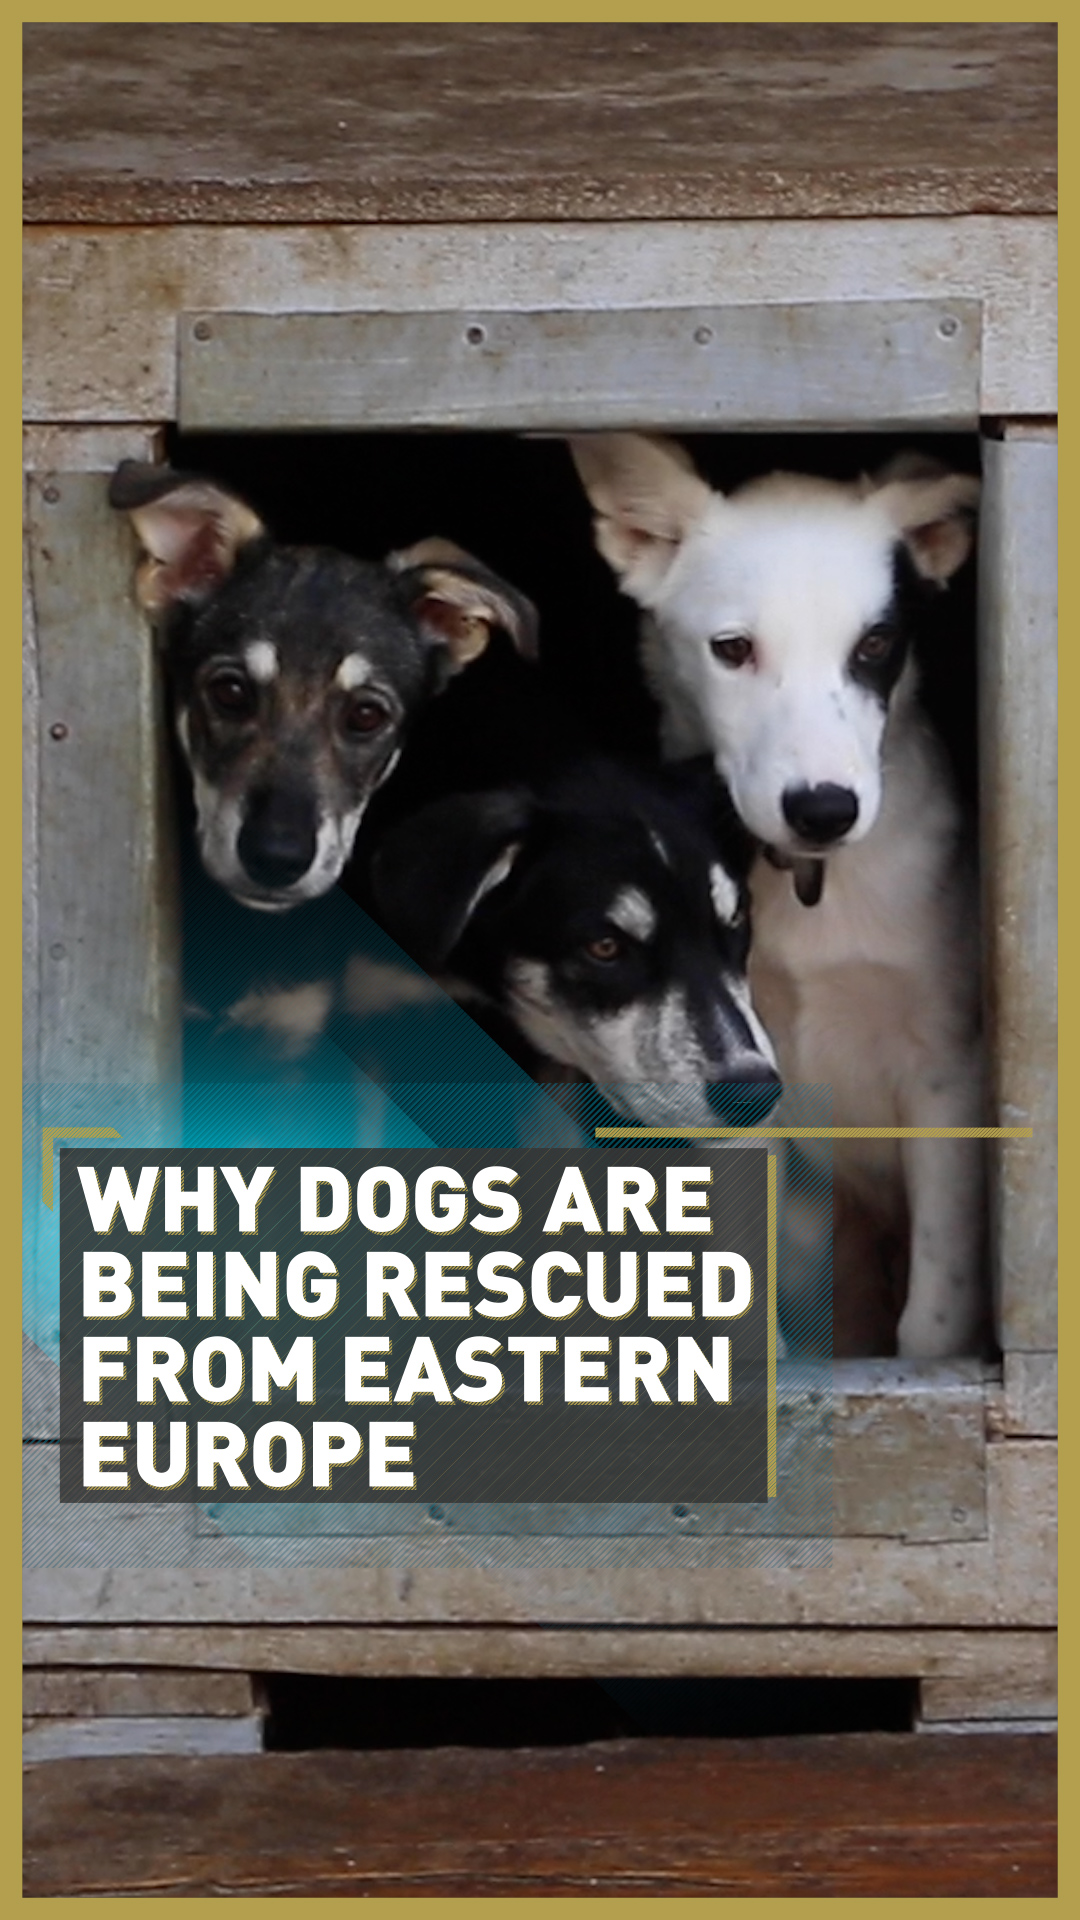 Tackling Eastern Europe's stray dogs crisis - CGTN